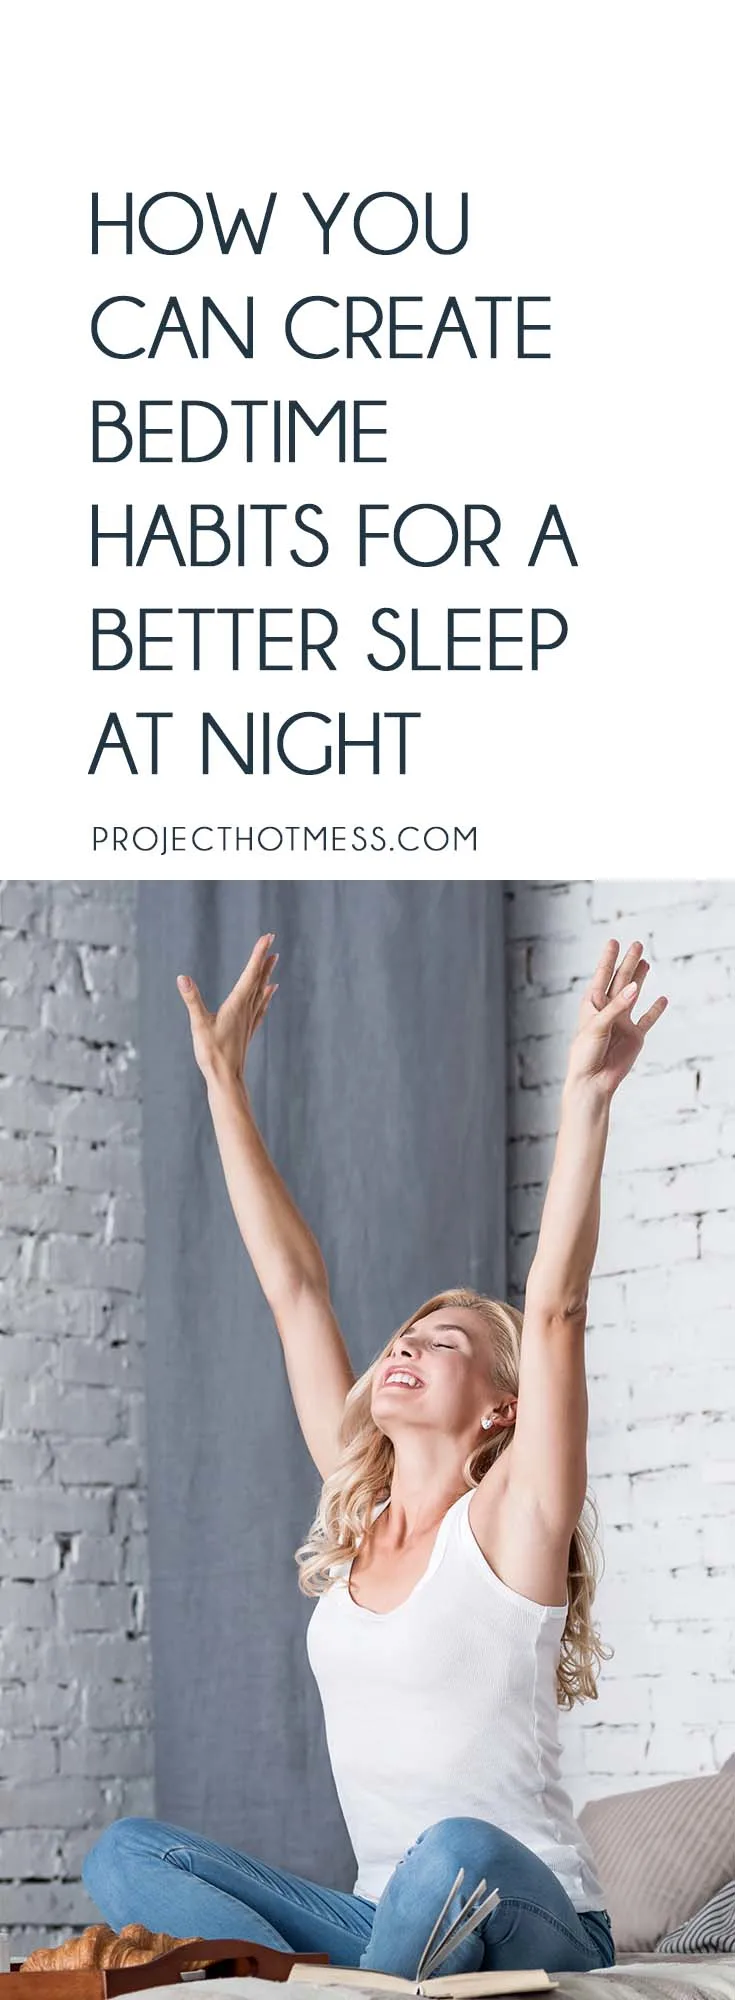 Having trouble drifting off to the land of nod and not getting the restful sleep you need? Try these tips to create habits to get a better sleep a night.